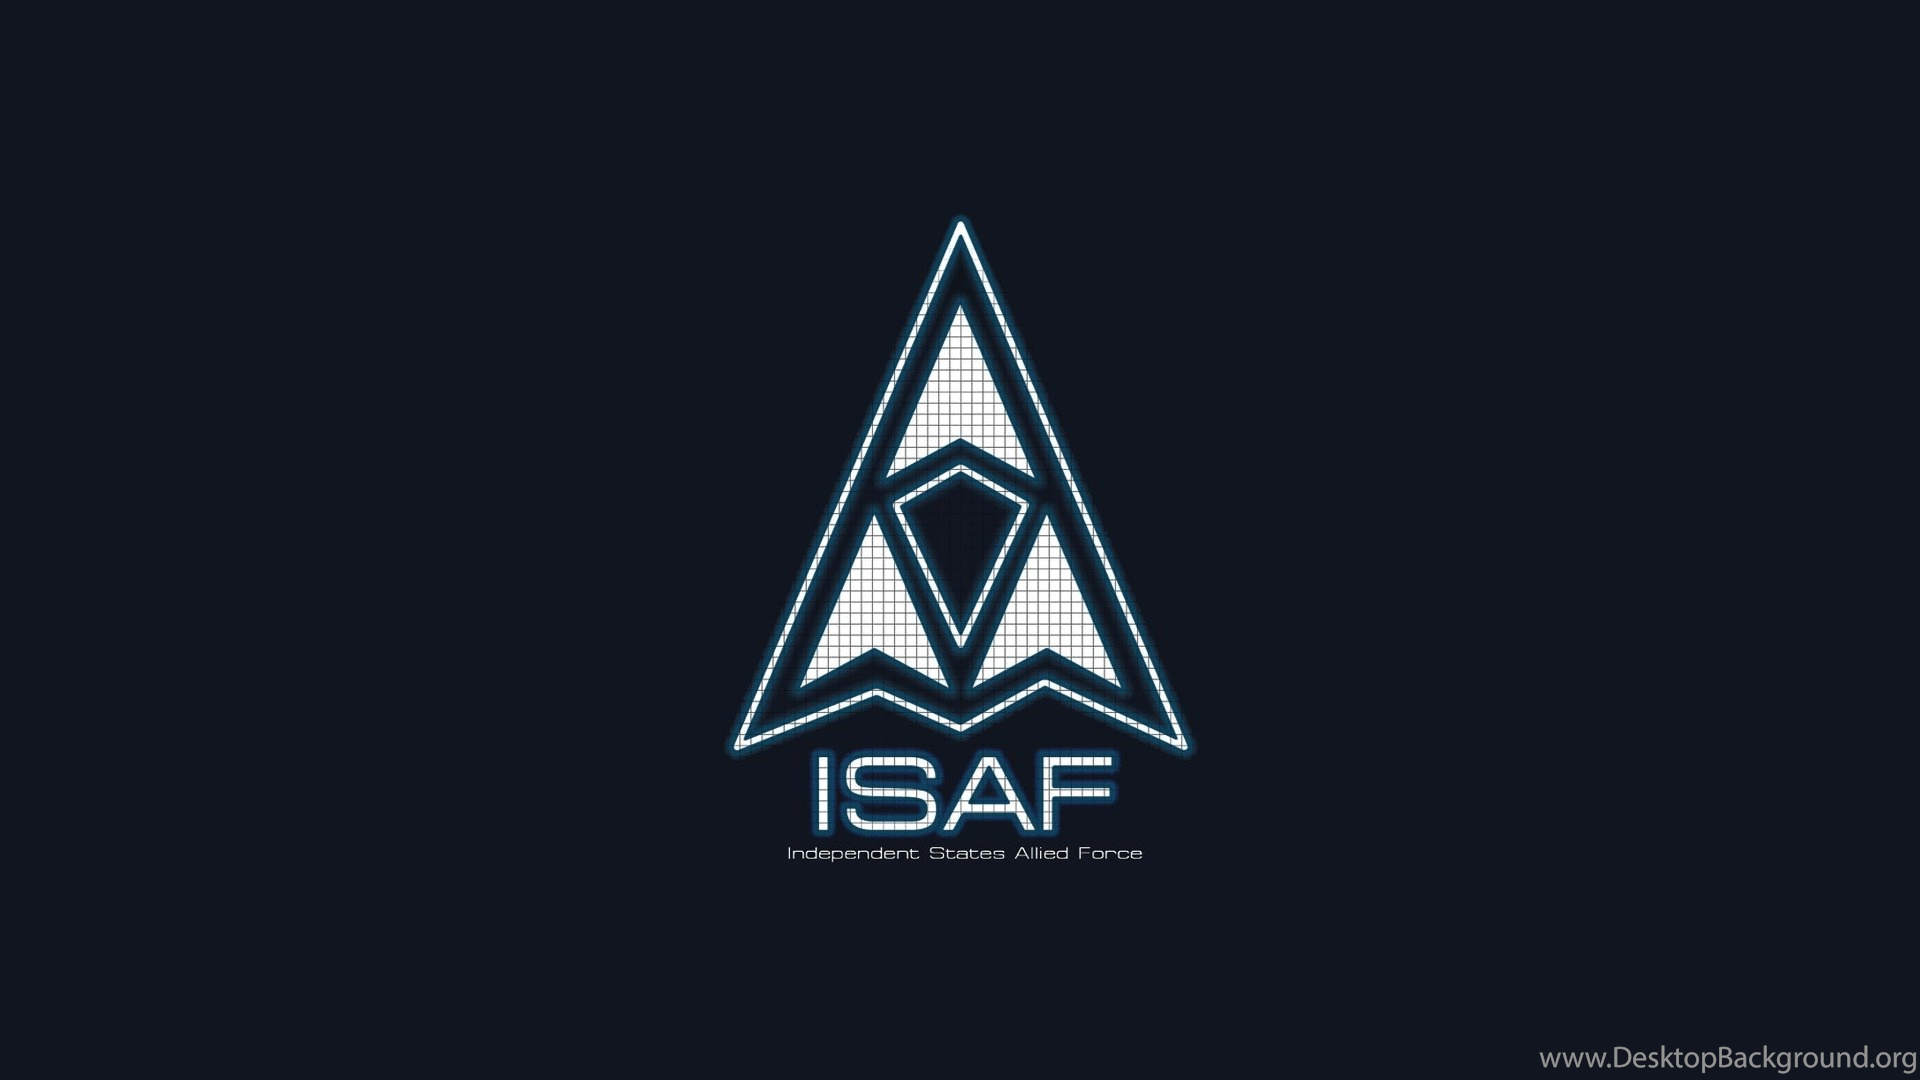 ISAF Logo - I Resized An Old ISAF Logo To 1080p, Figured You Guys Need A ...